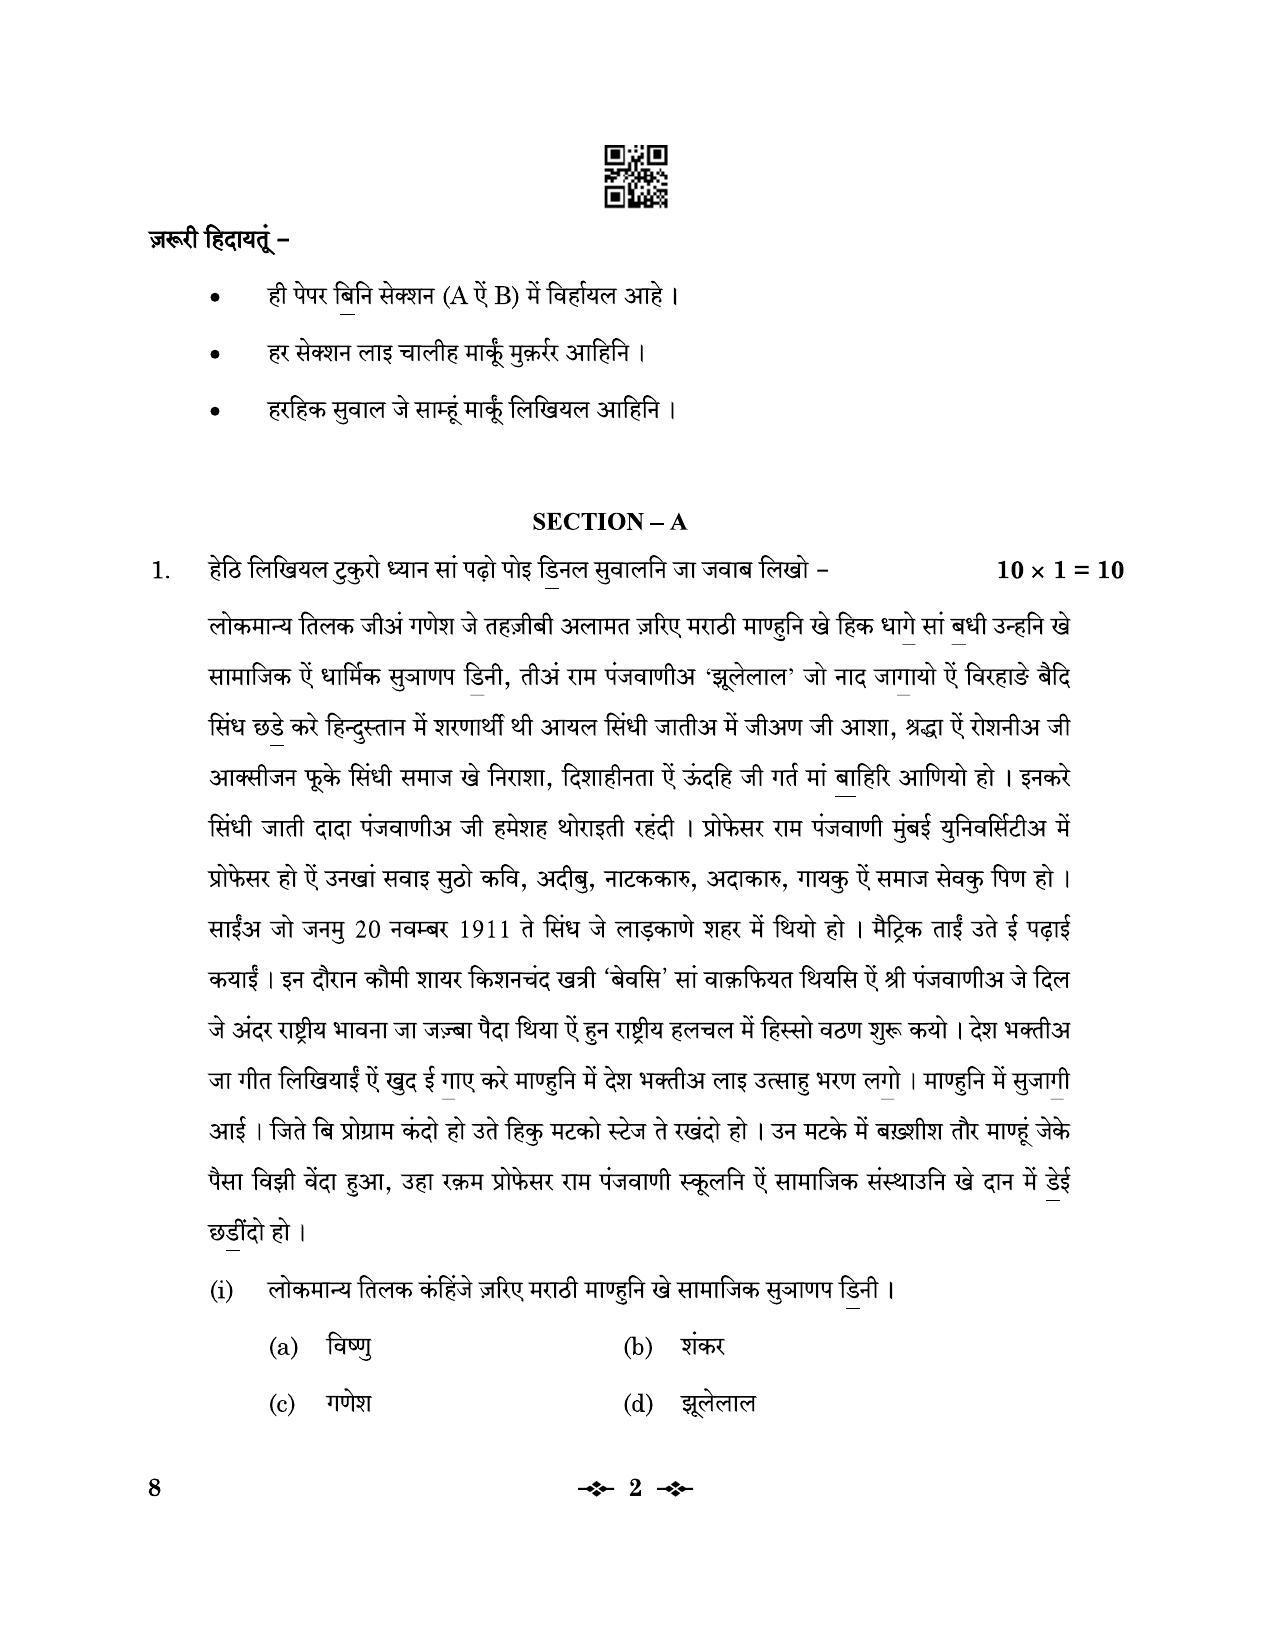 CBSE Class 12 8_Sindhi 2023 Question Paper - Page 2